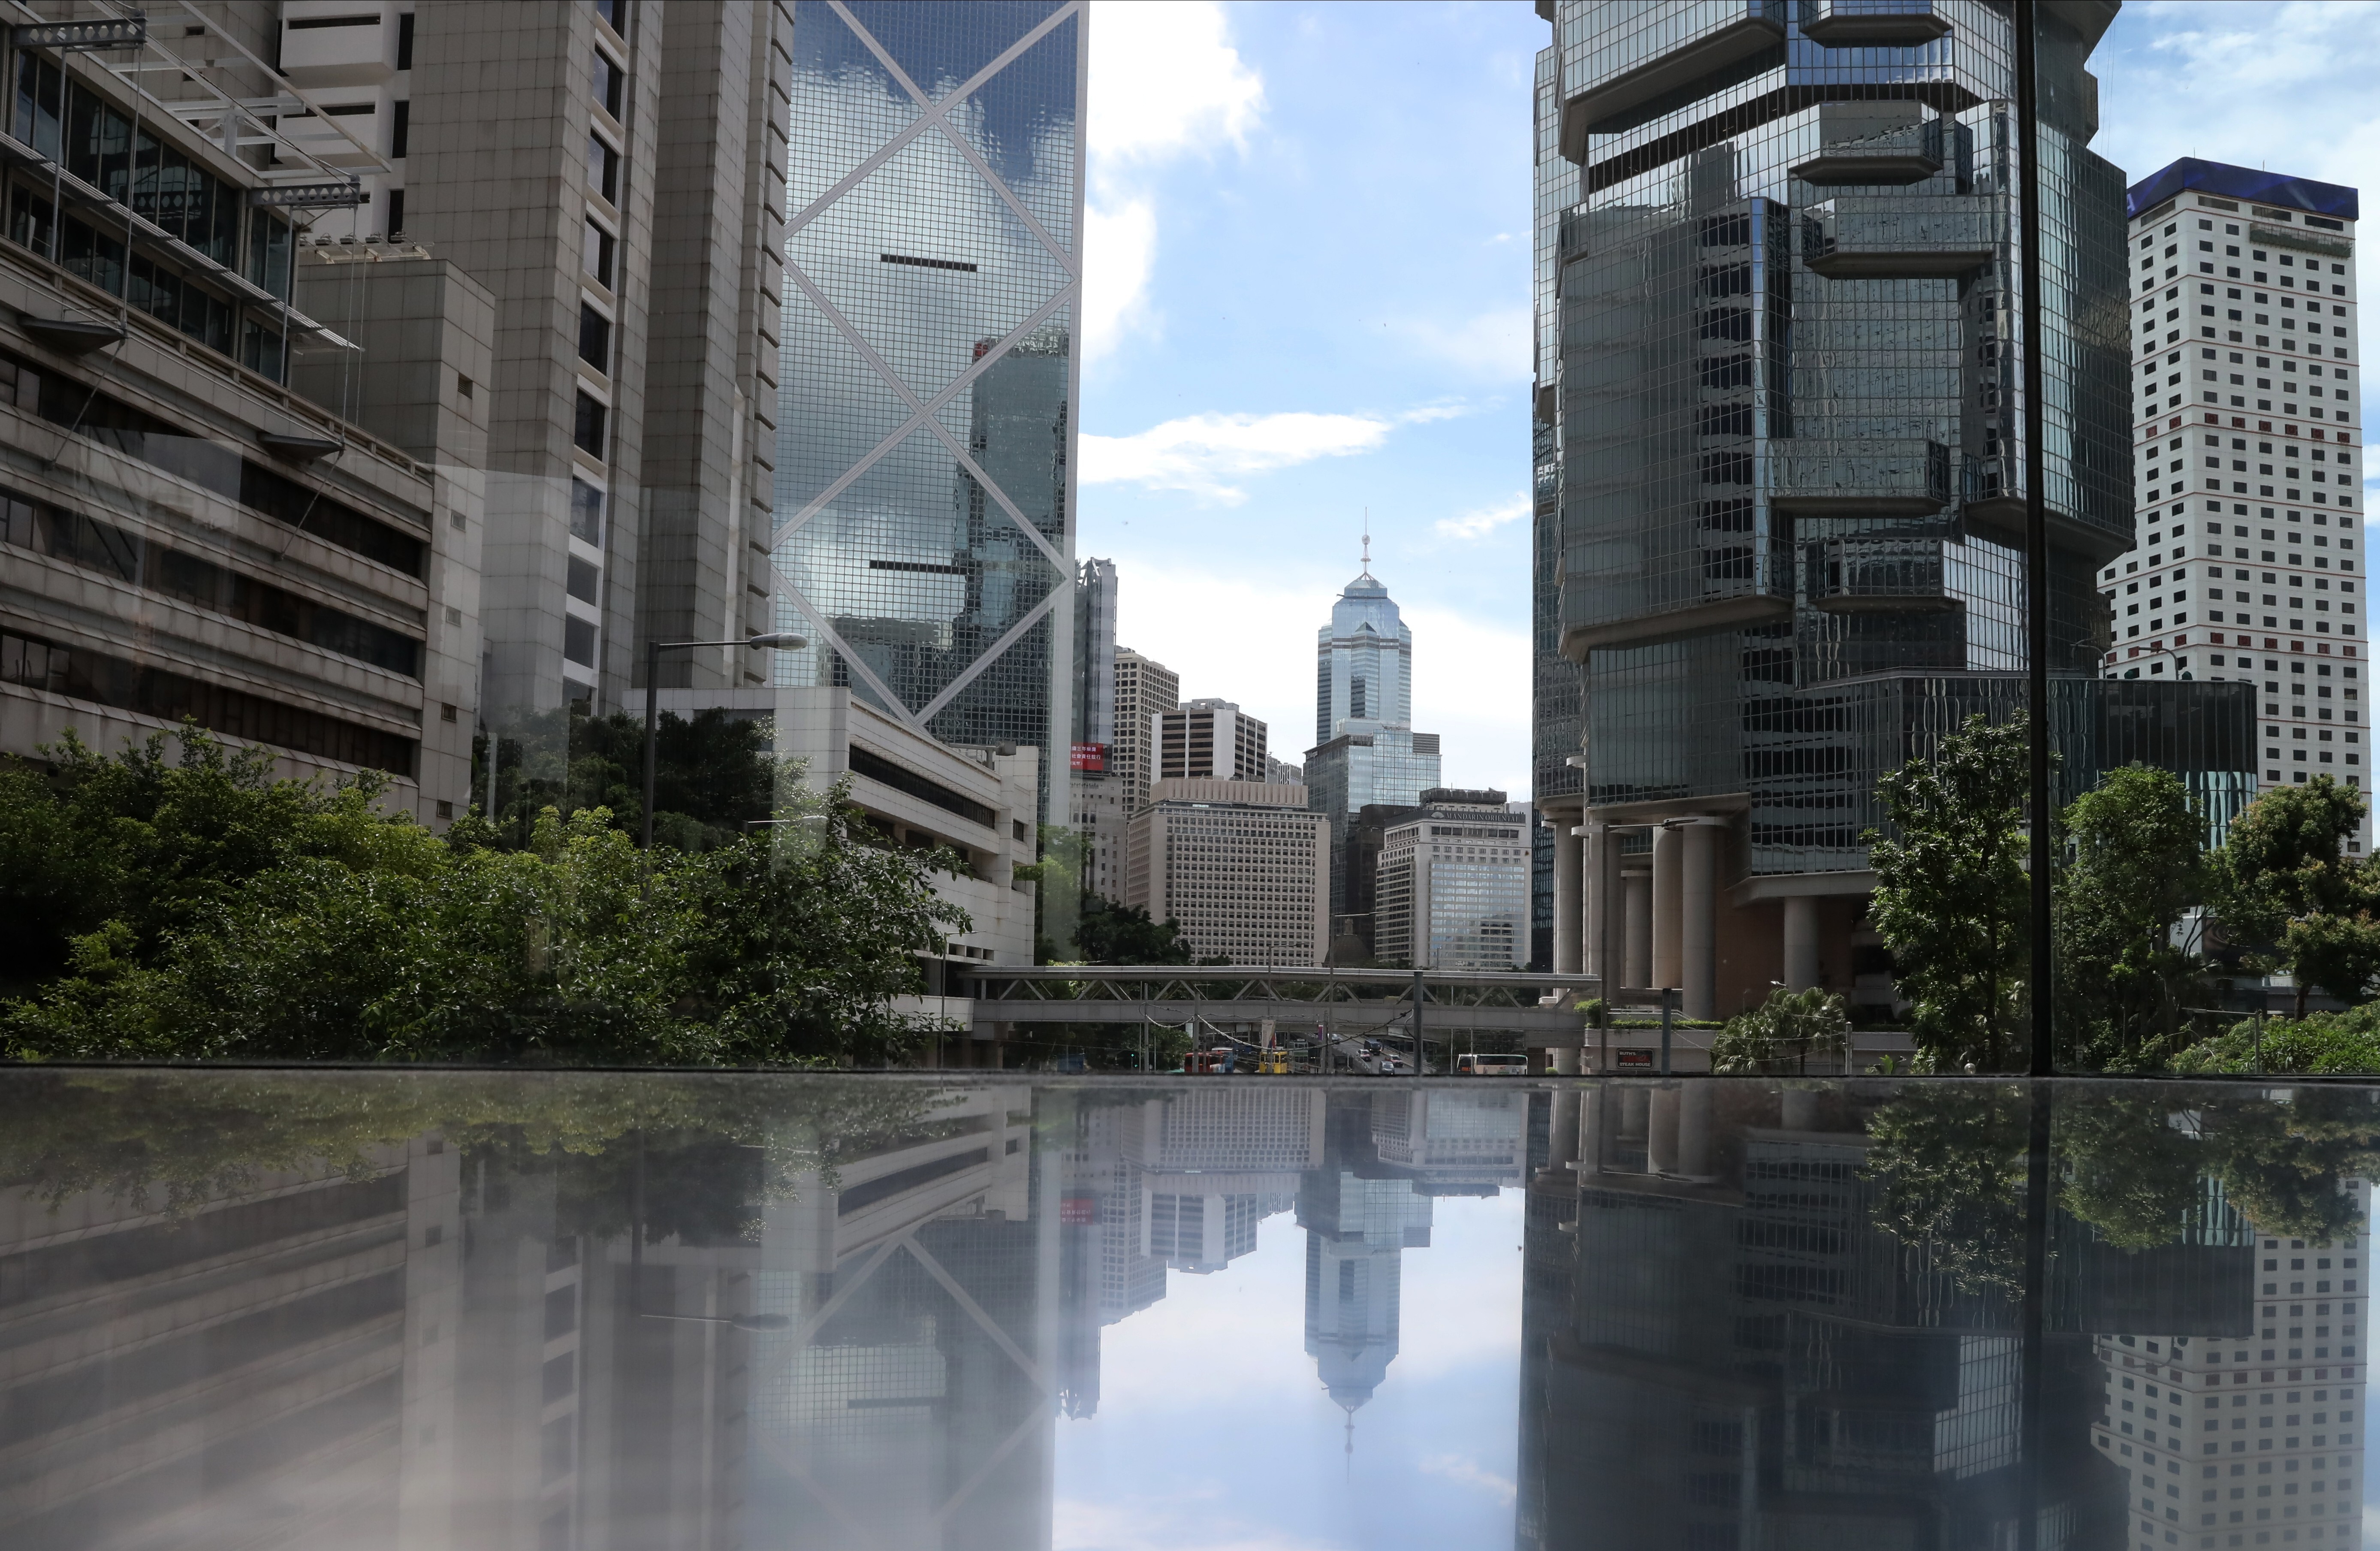 Office buildings in Hong Kong’s Admiralty and Central districts. Photo: K Y Cheng